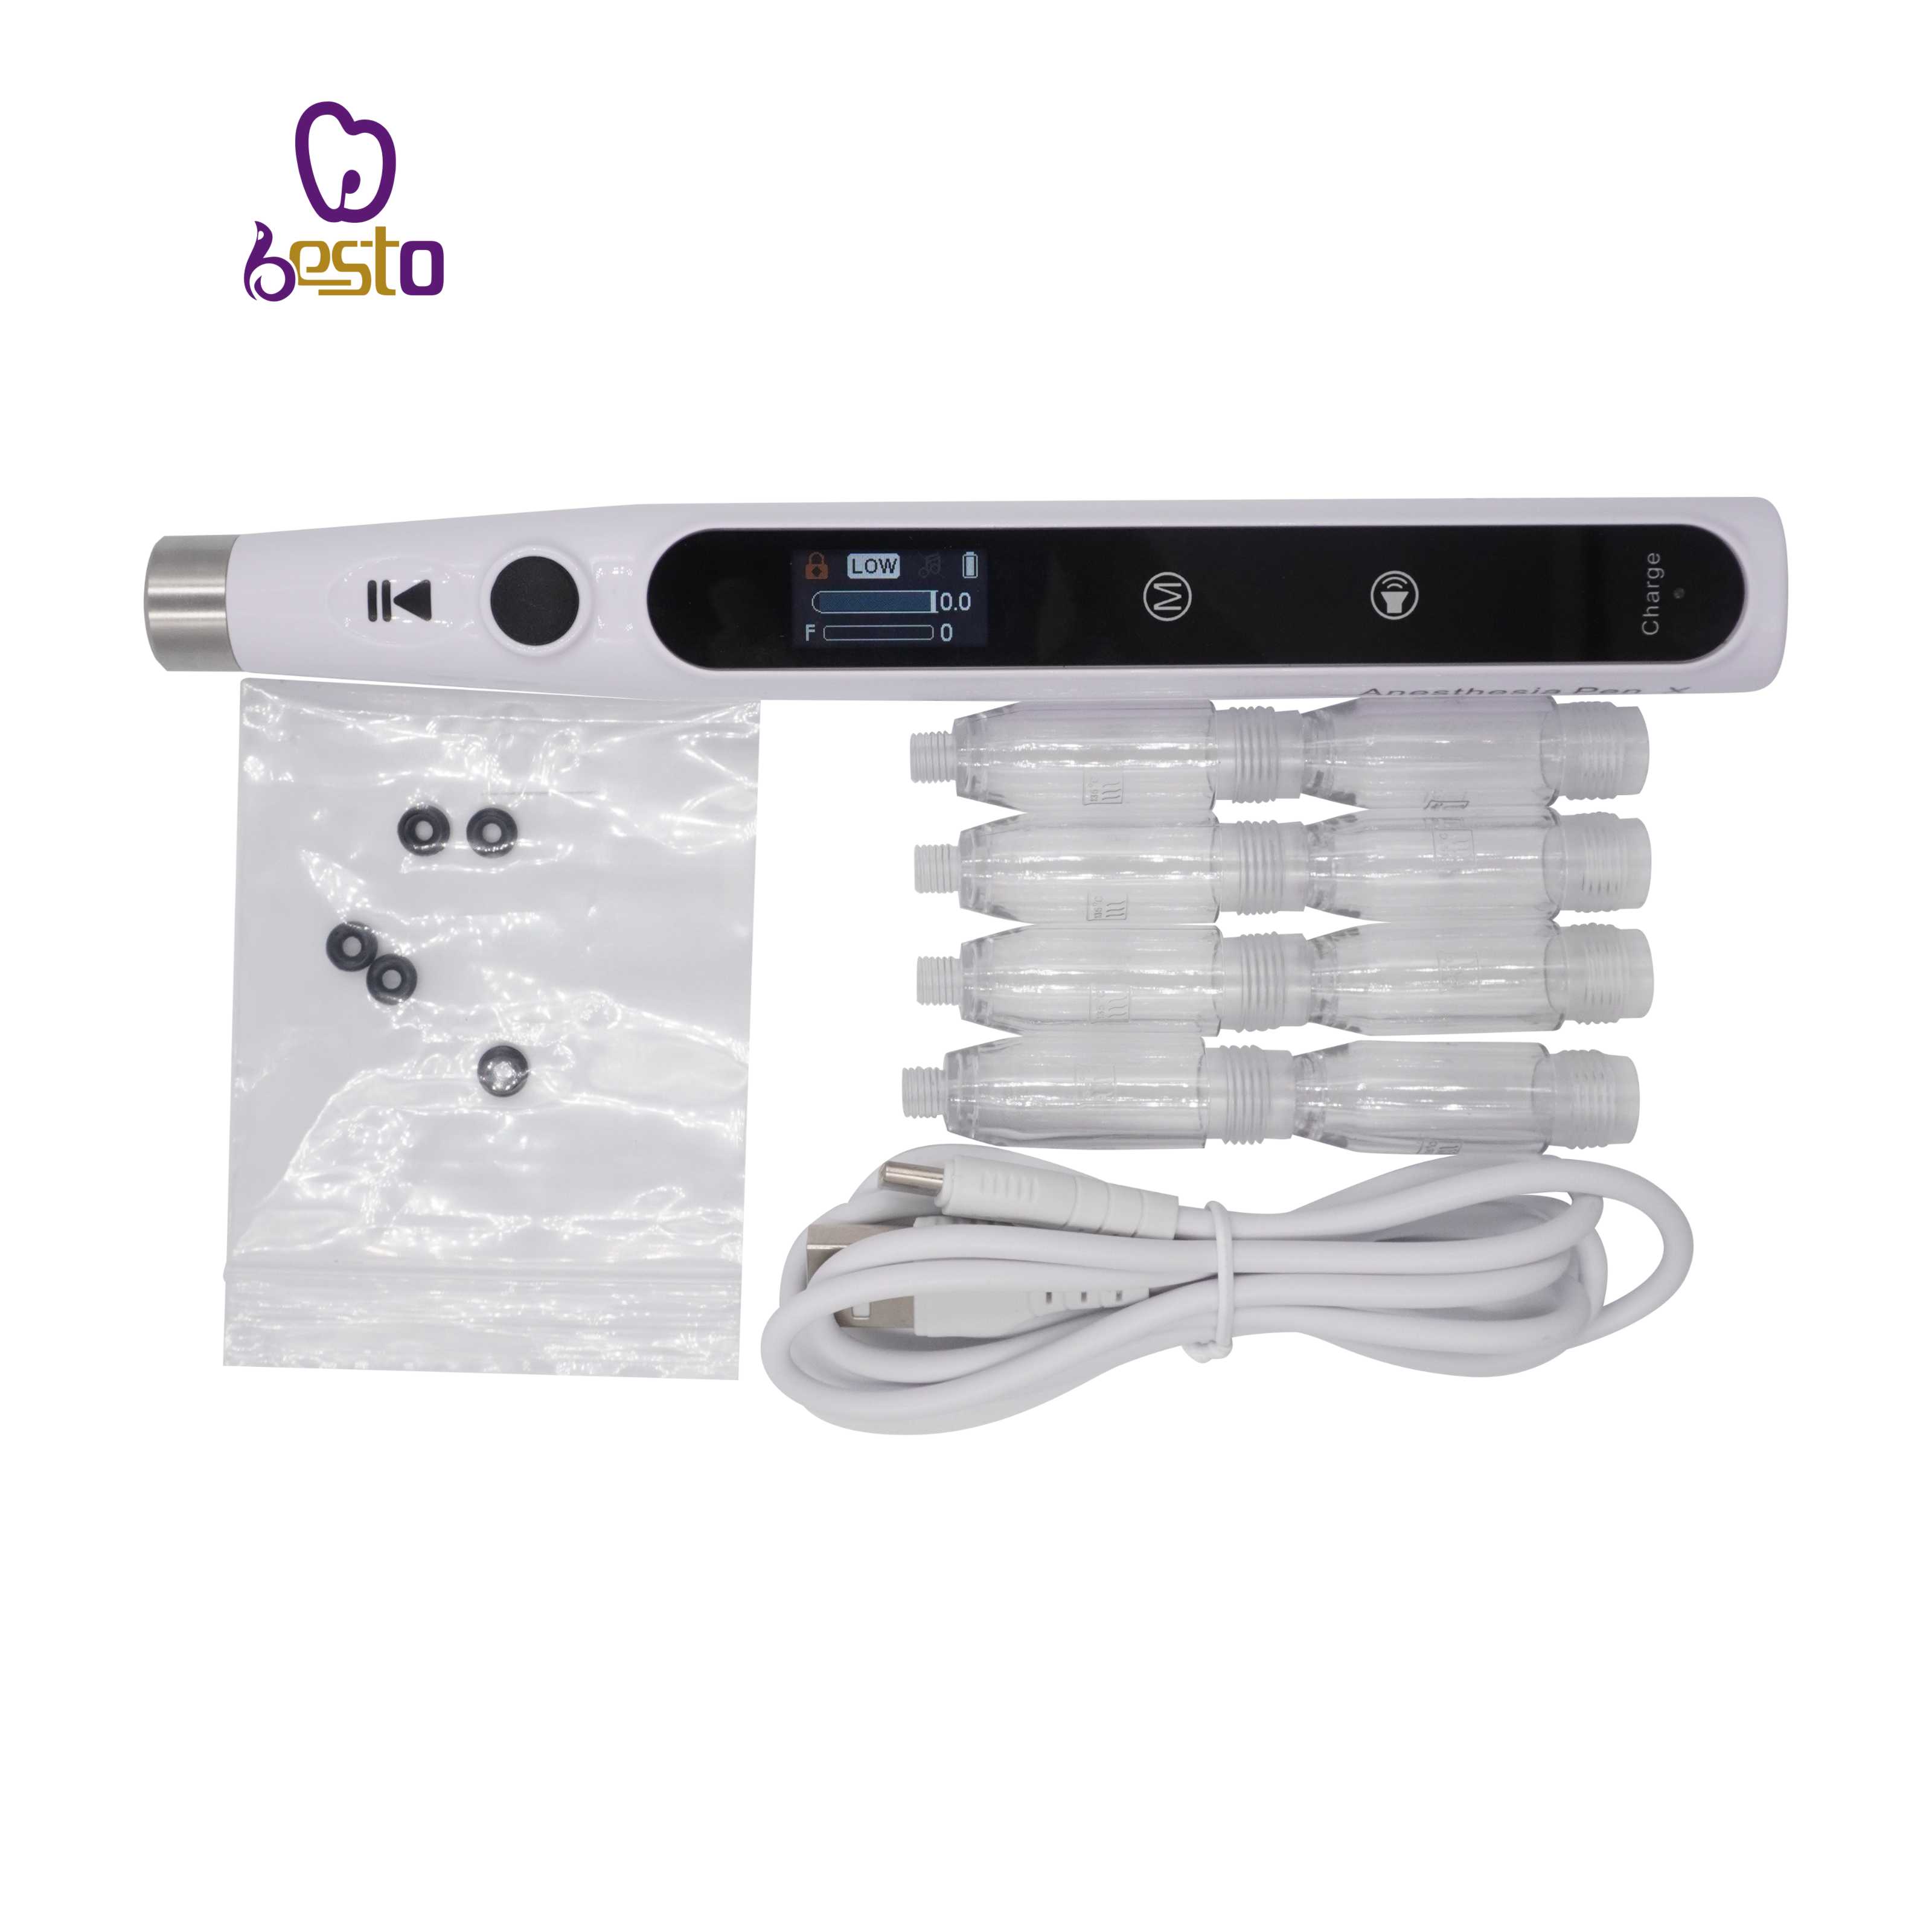 Dental Oral Anesthesia Injector Portable Painless Wireless Local Anesthesia with Operable LCD Display Chargeable DentalEquipment